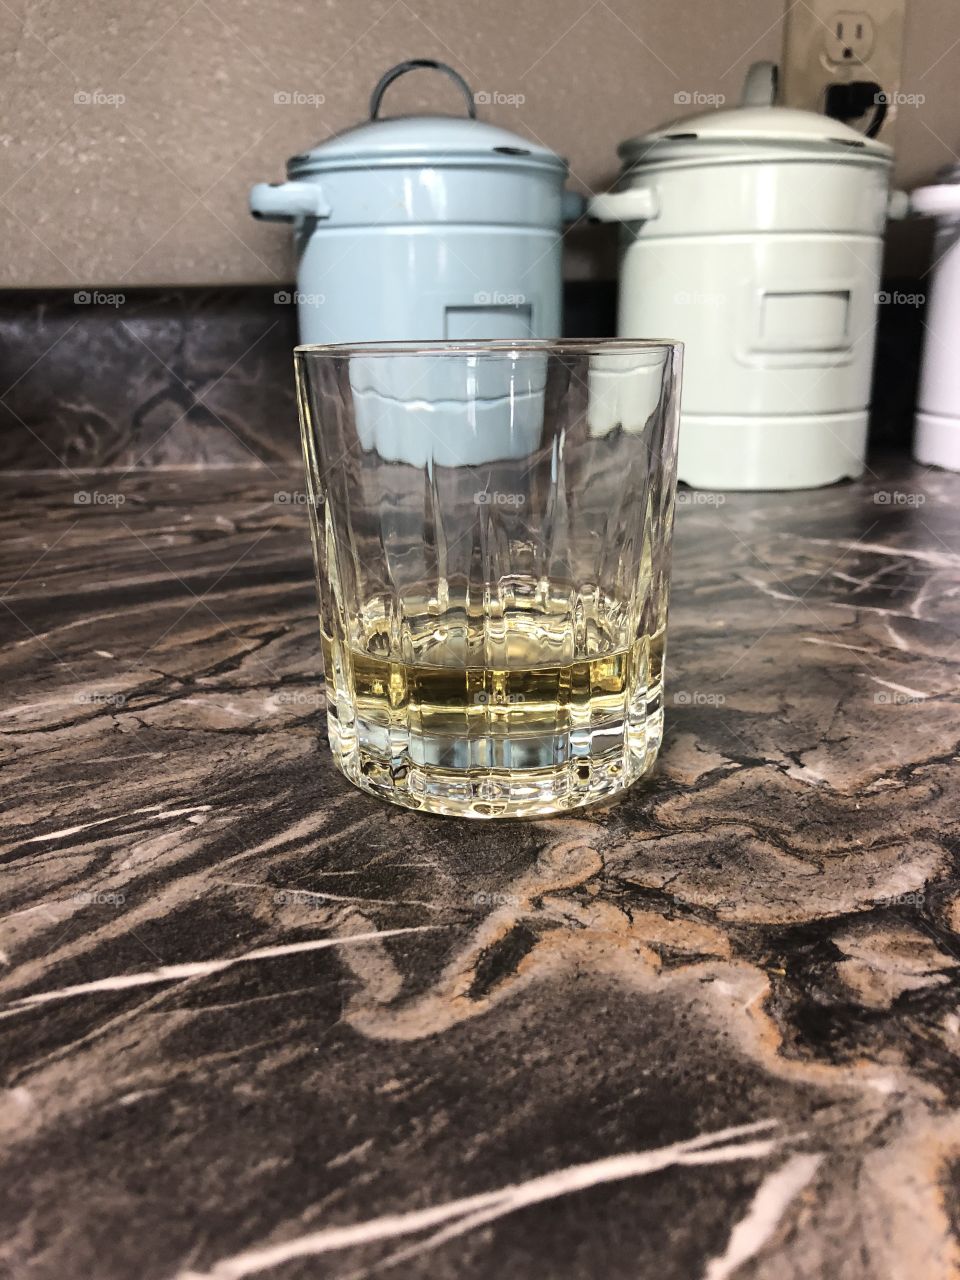 It’s never a bad time for Scotch